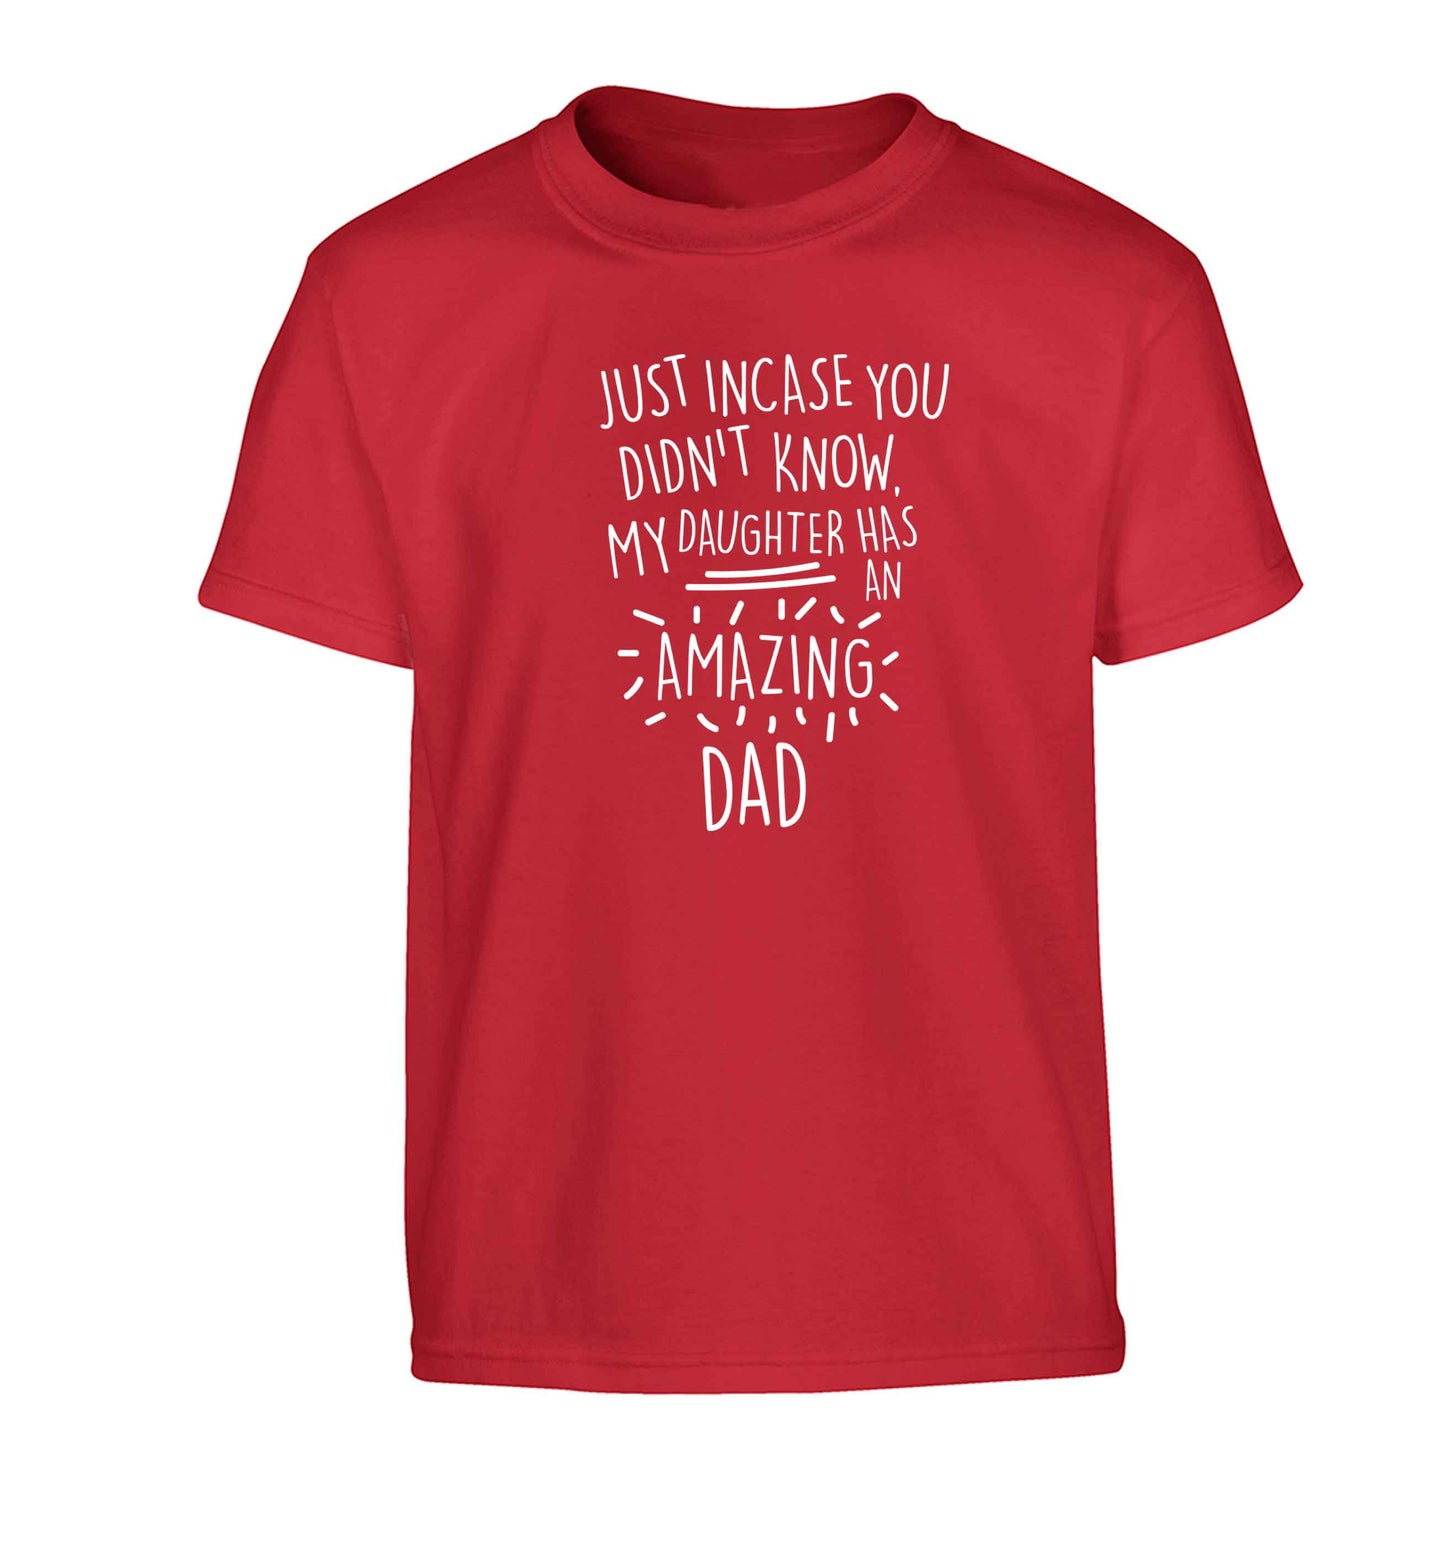 Just incase you didn't know my daughter has an amazing dad Children's red Tshirt 12-13 Years